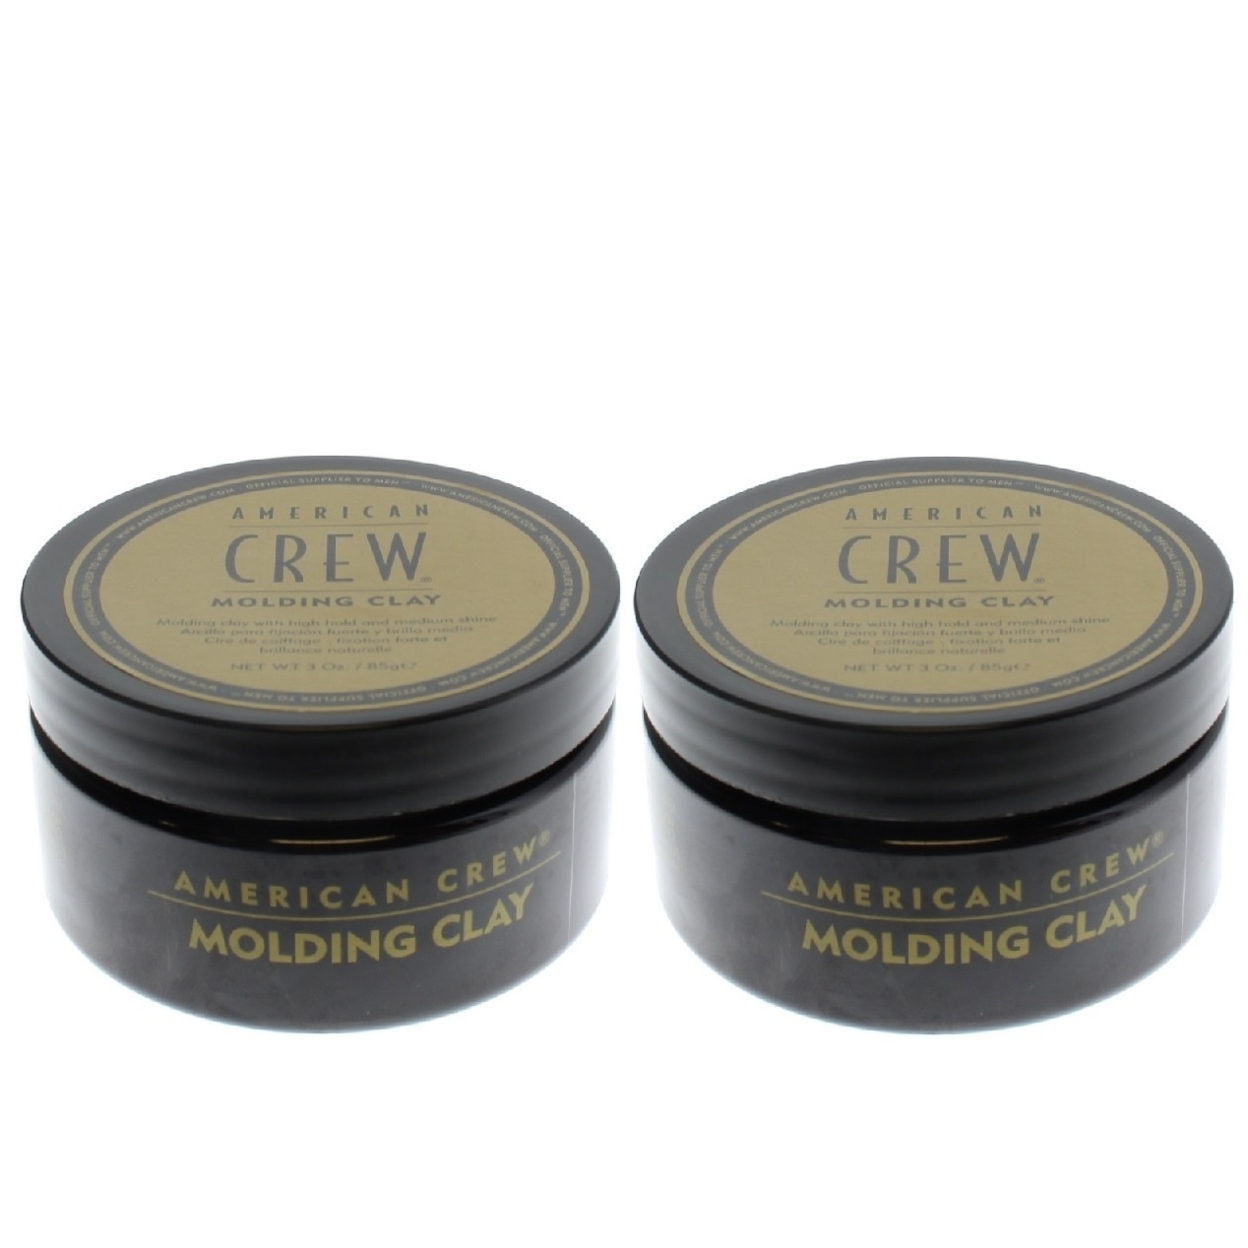 American Crew Molding Clay 3oz/85g (2 Pack)